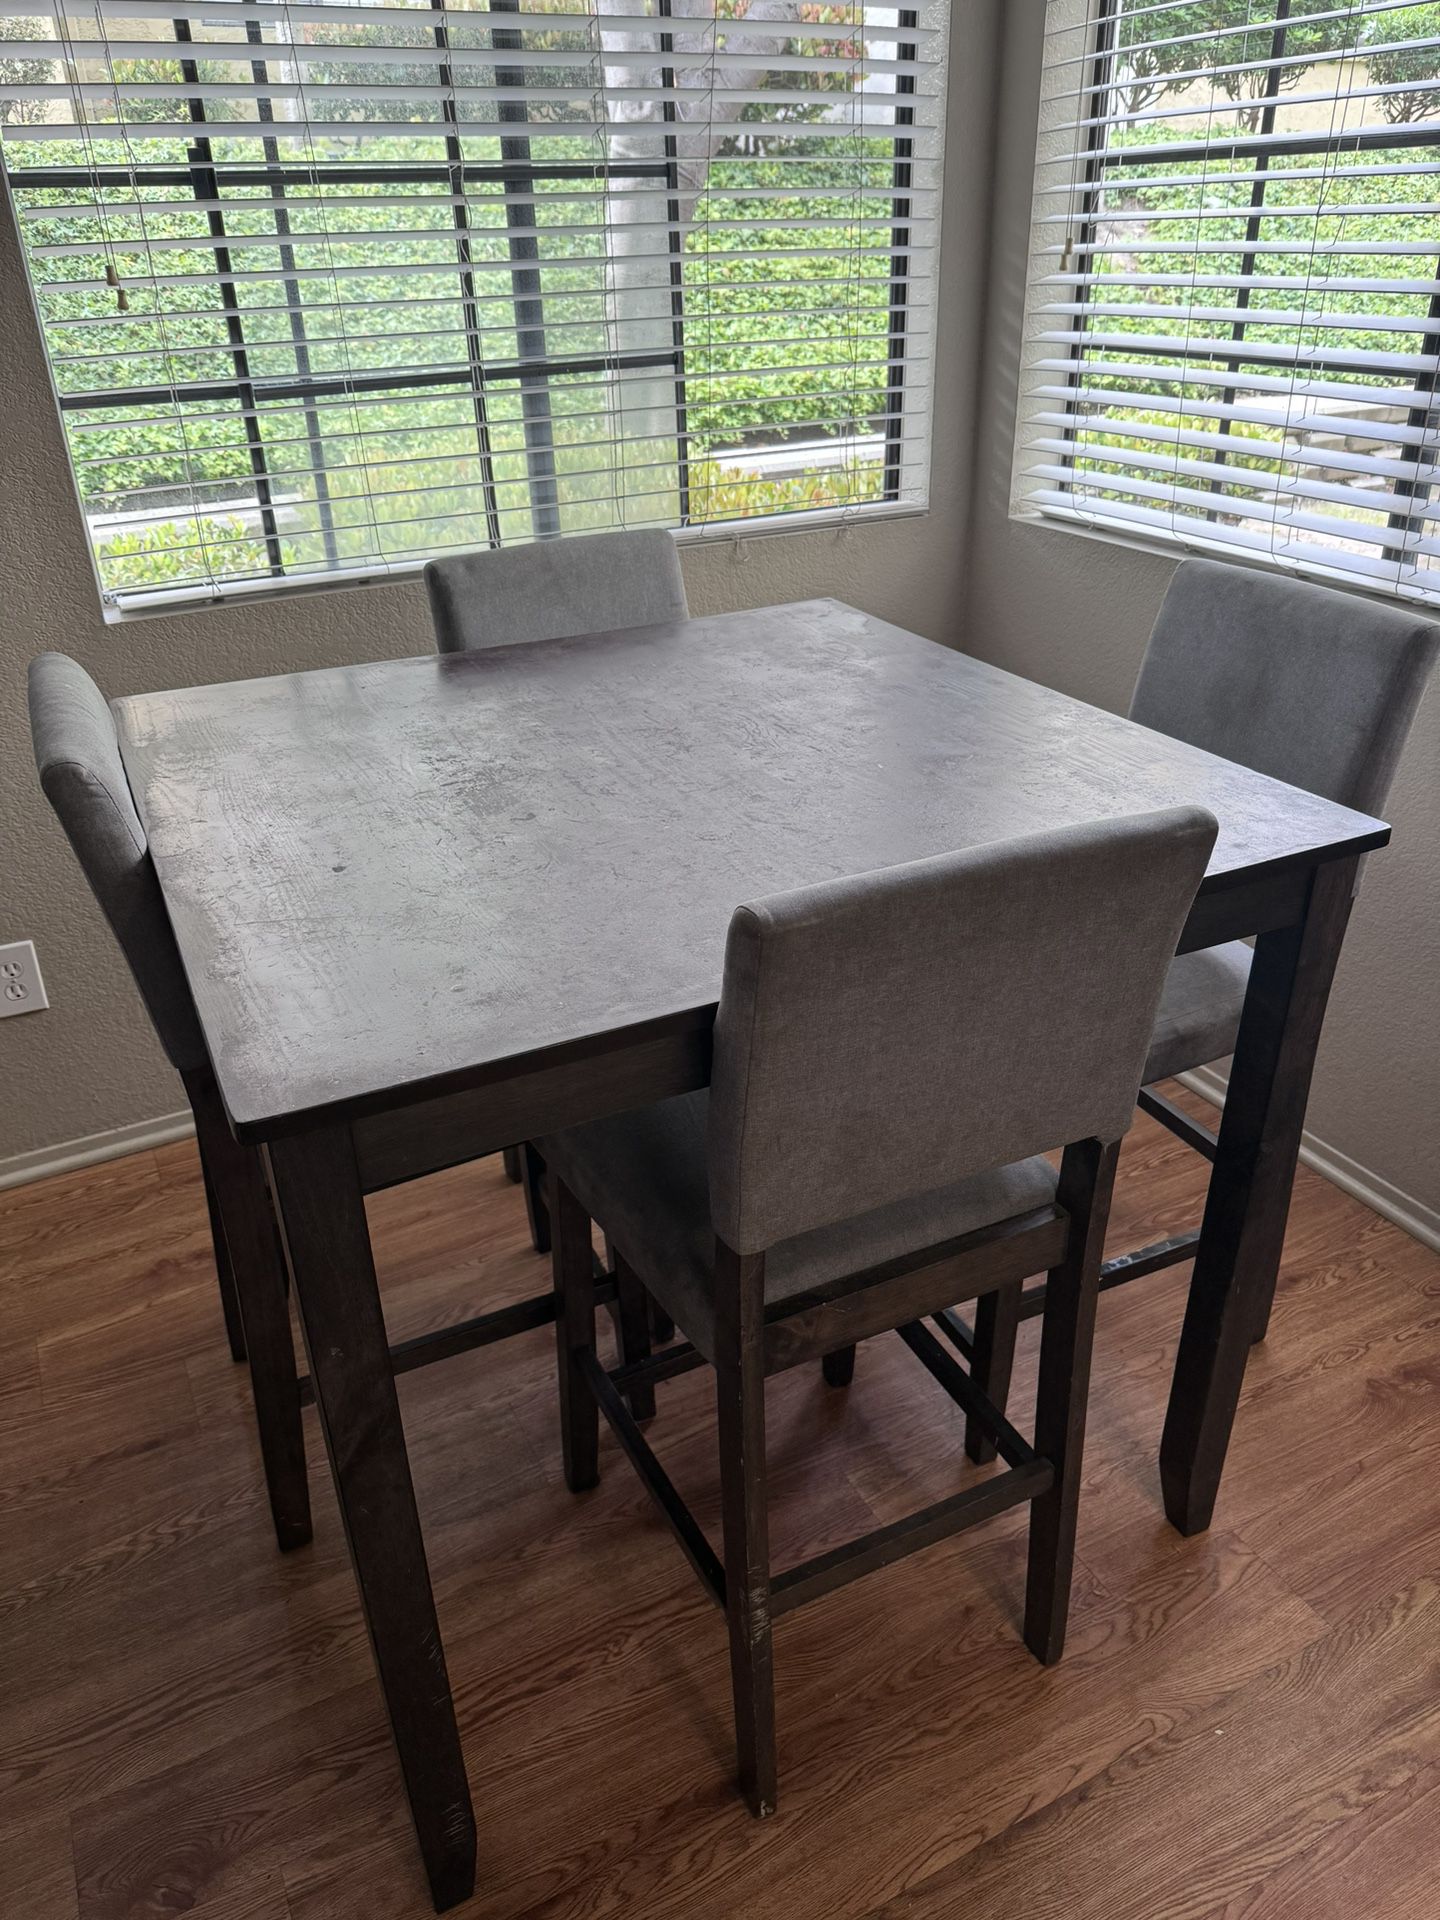 FREE!!!! Dining Table With 4 Chairs & Desk/drawers